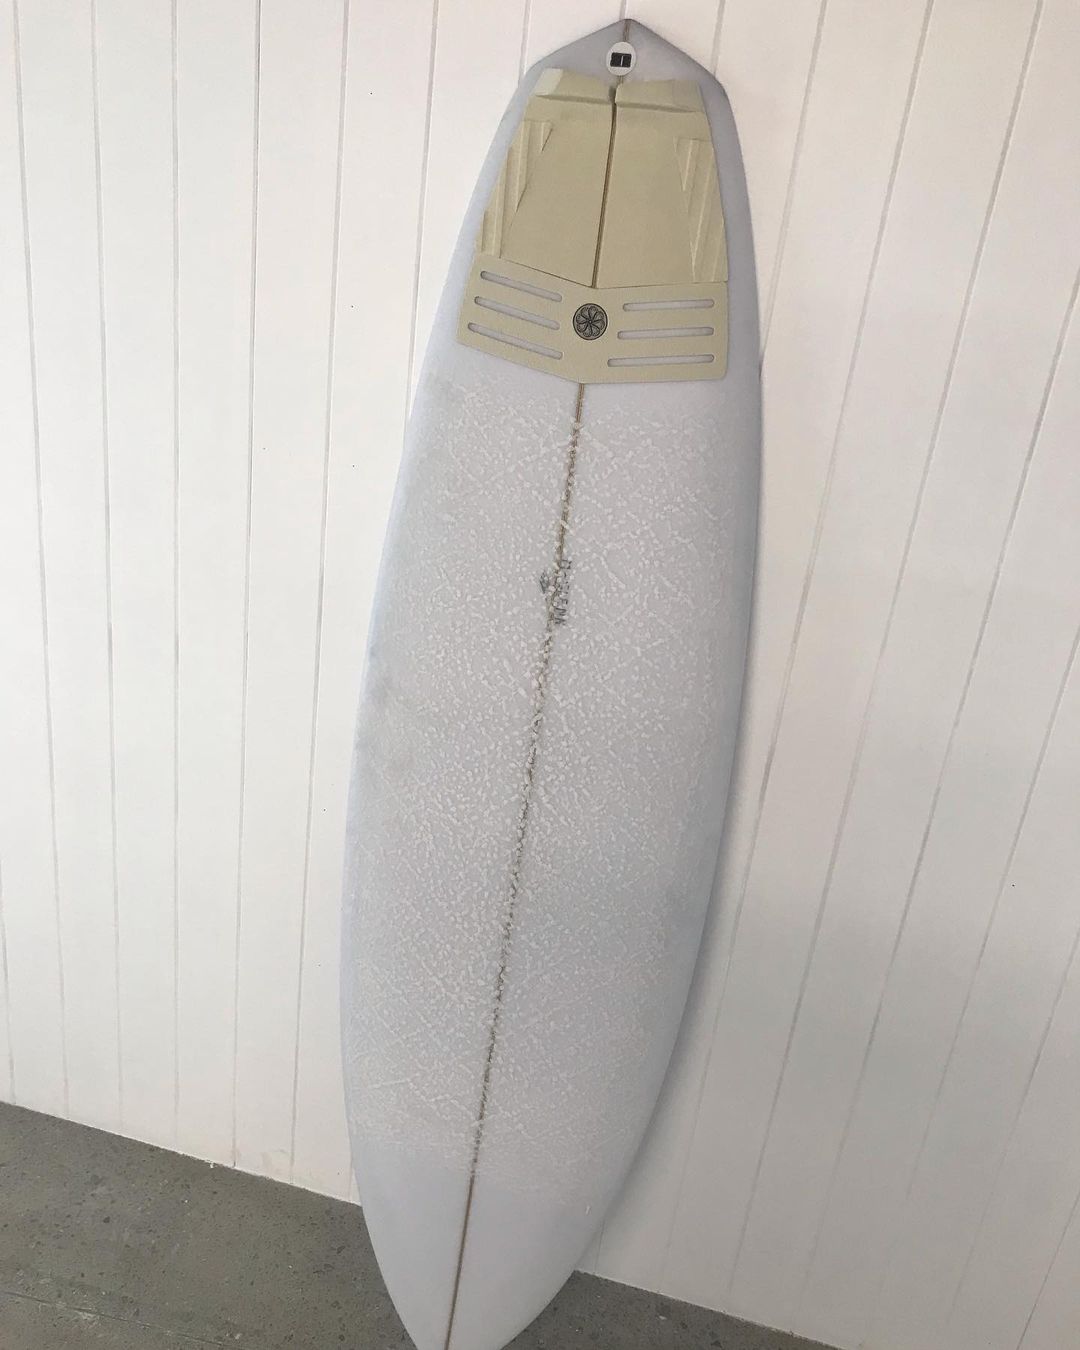 How to Identify Damage on Your Paddle Board: A Visual Inspection Guide